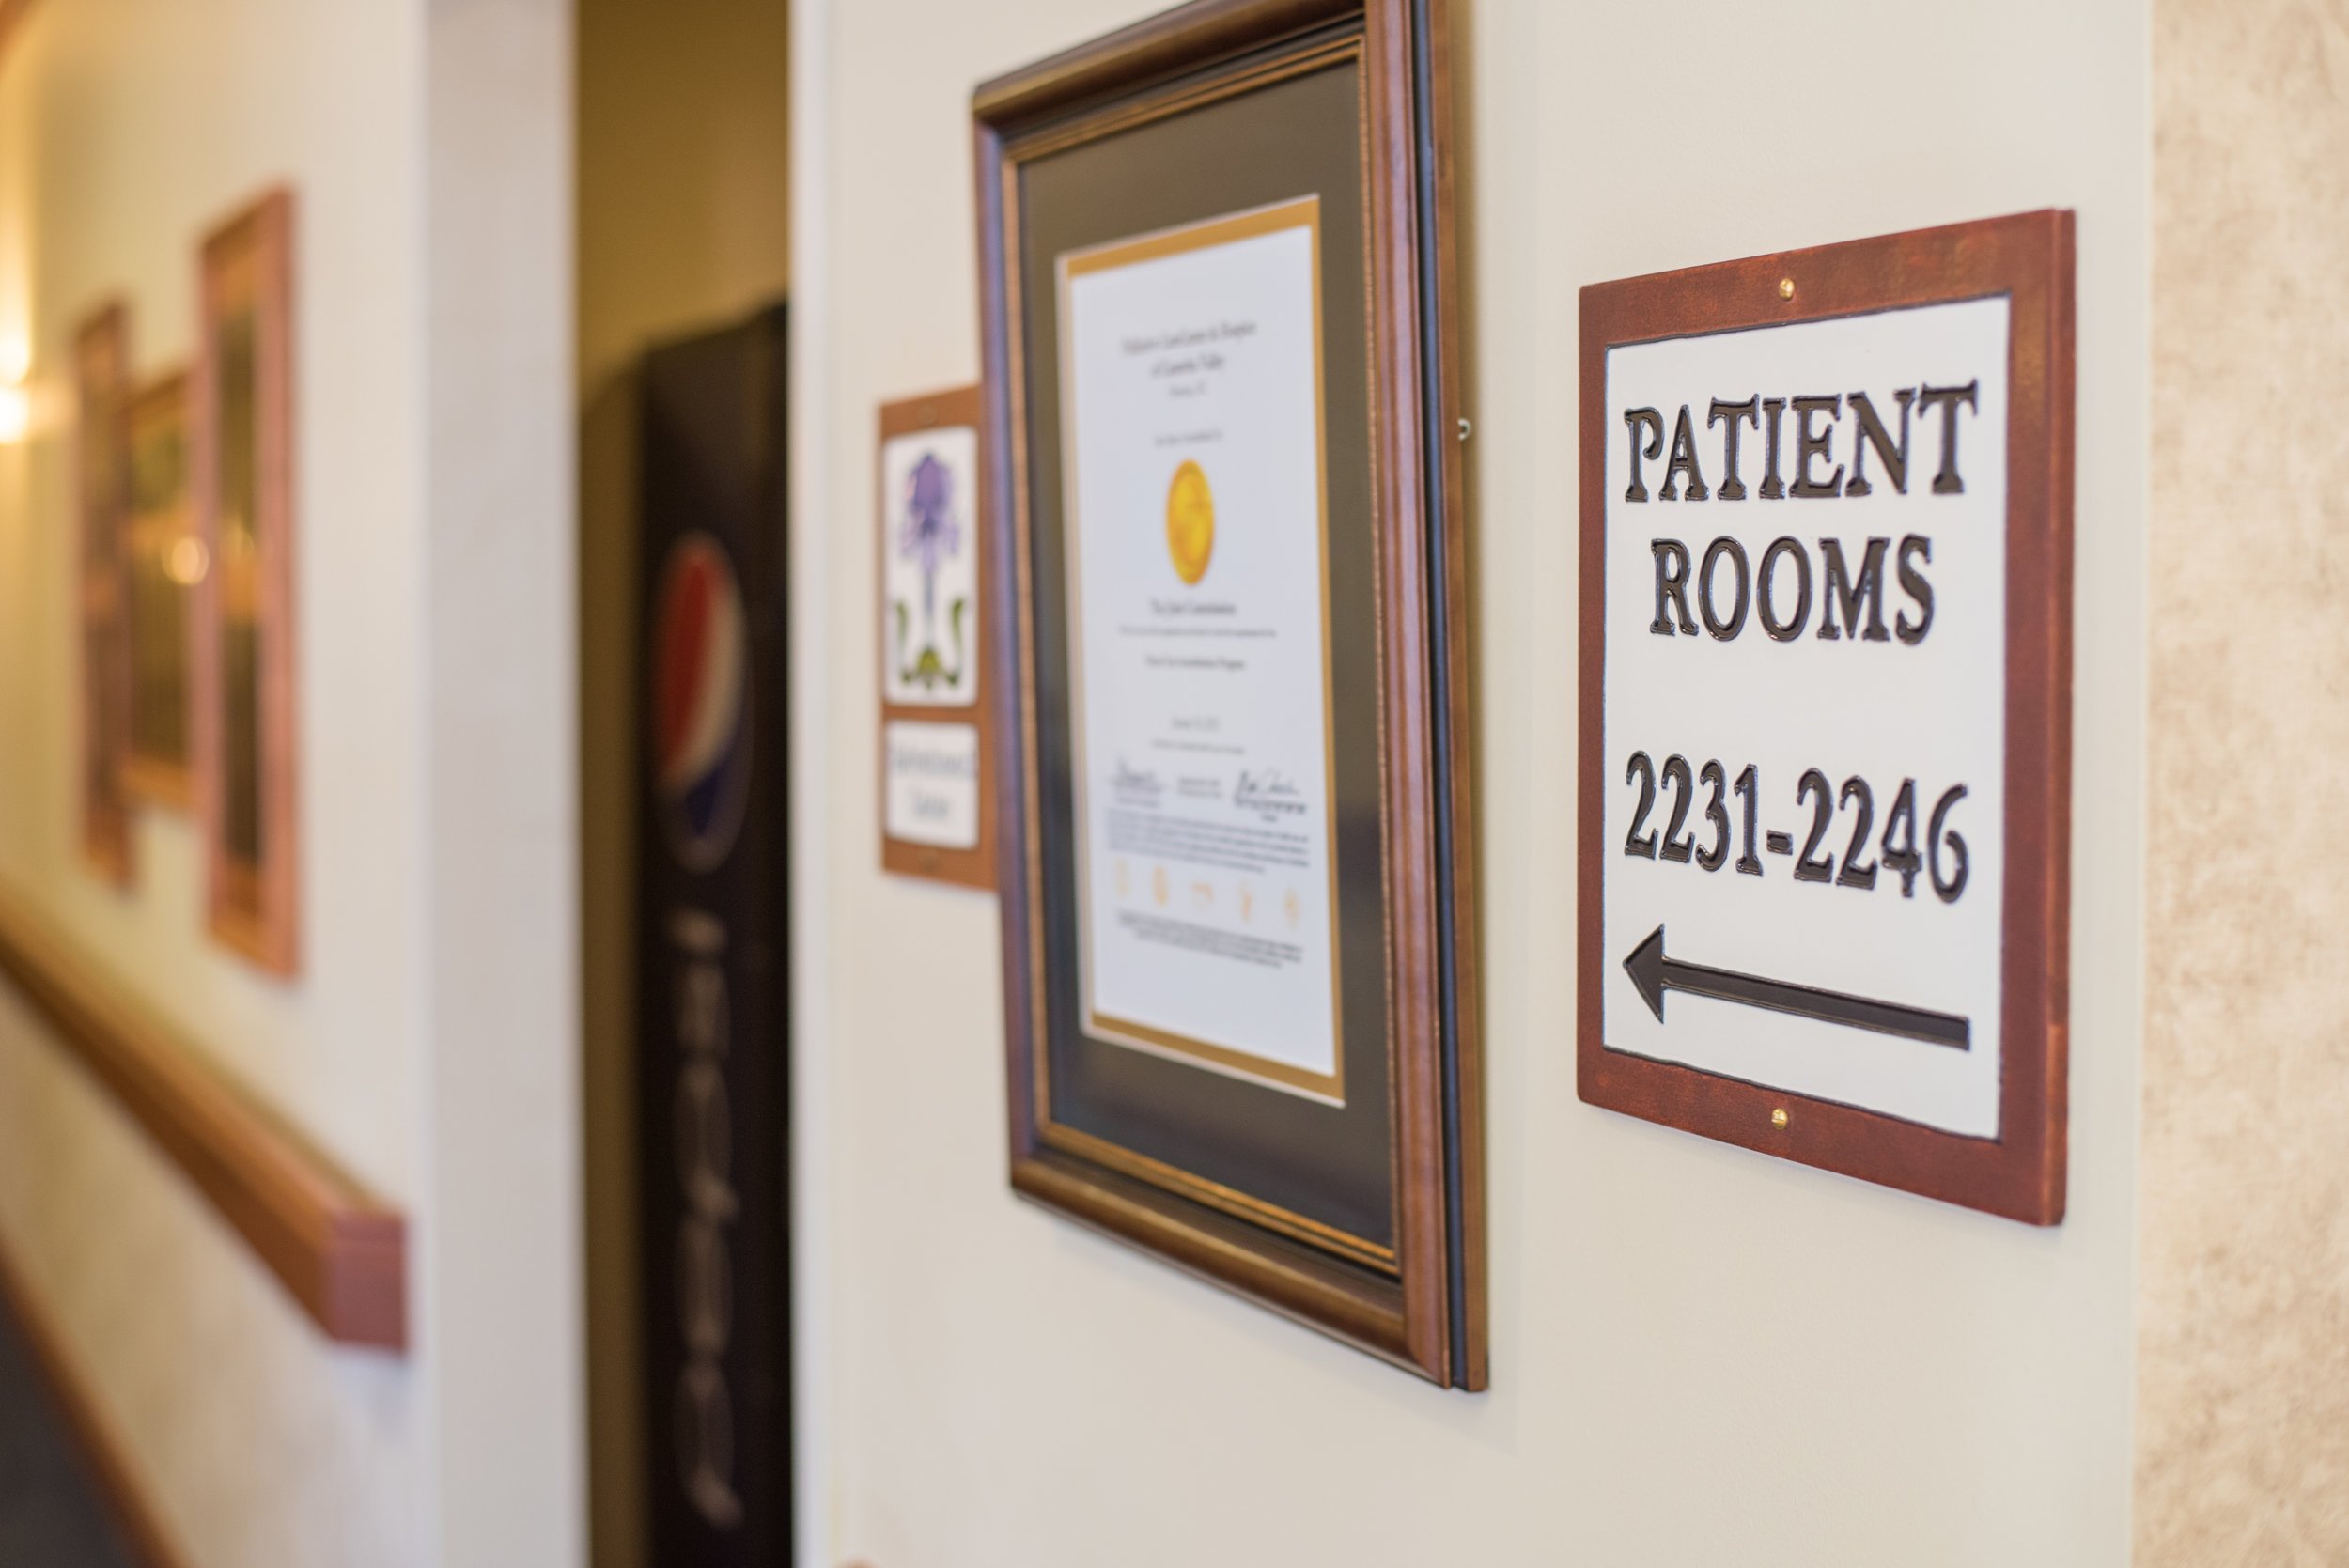 Catawba Valley Hospice House Patient Rooms Sign.jpg